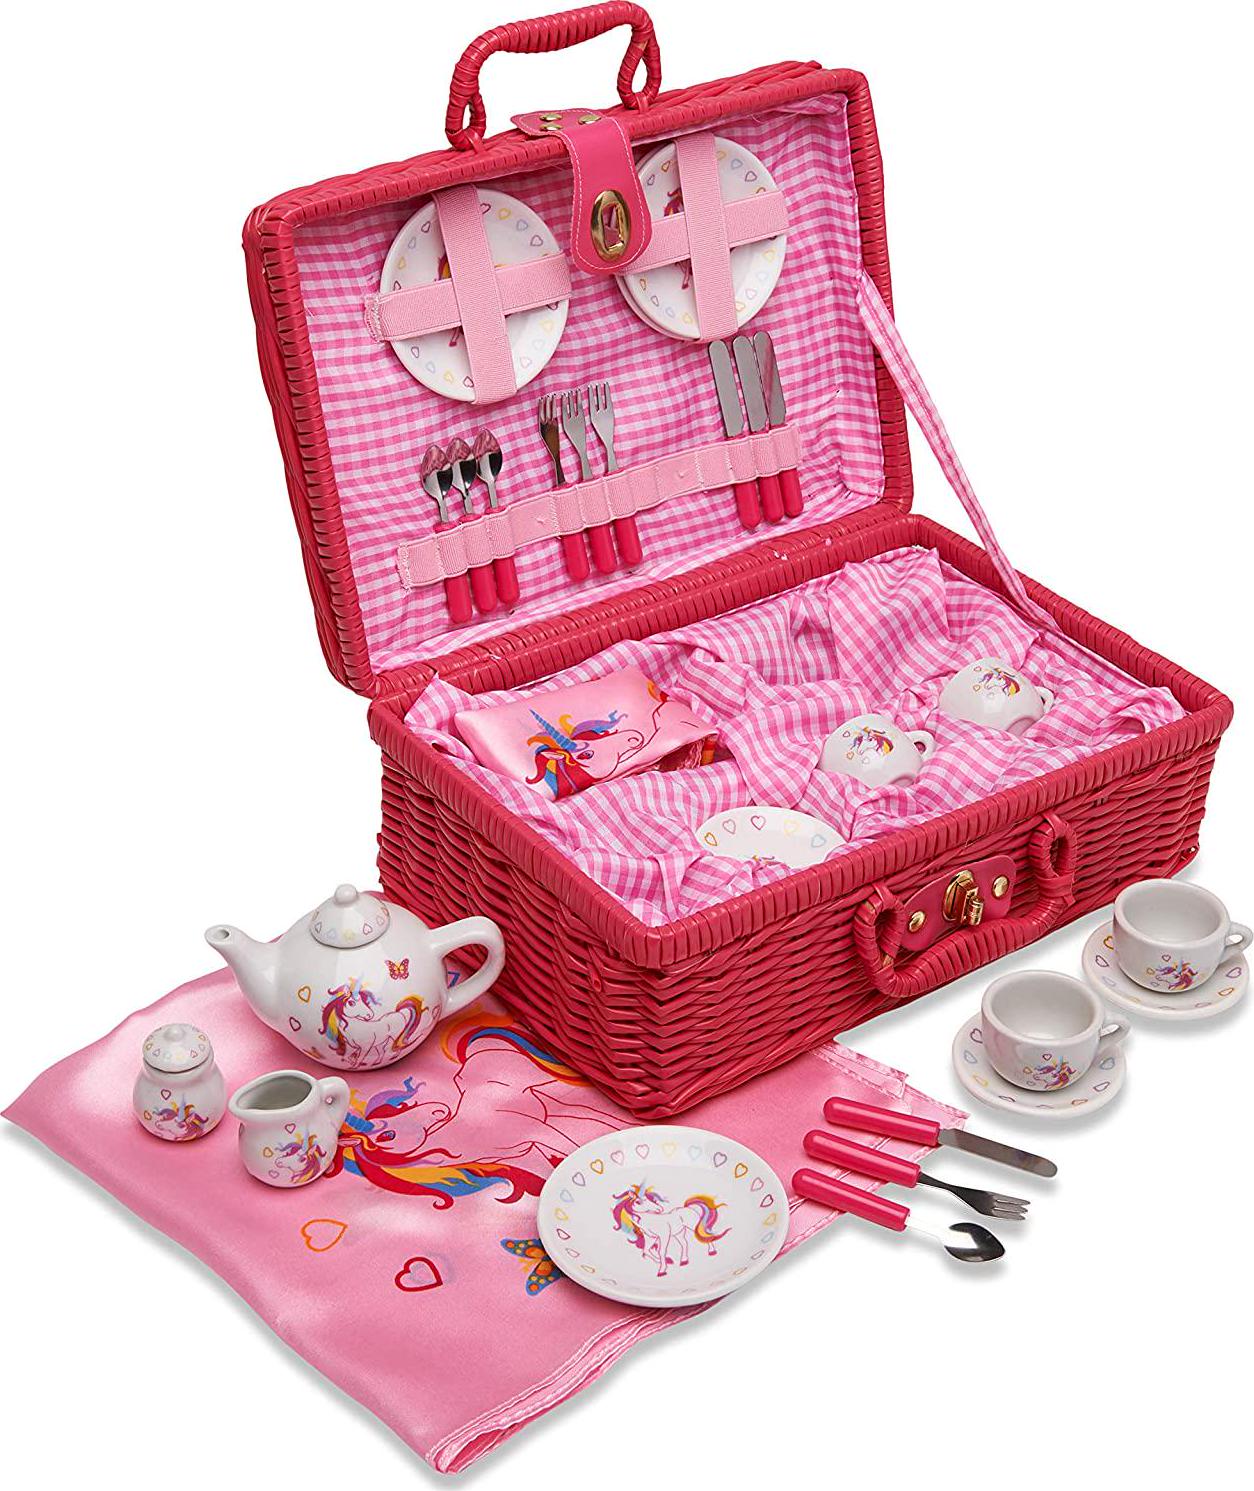 Wobbly Jelly, Wobbly Jelly - 'Magical Unicorn' China Tea Set and Picnic Basket - 31 pc Toy Tea Set or Children